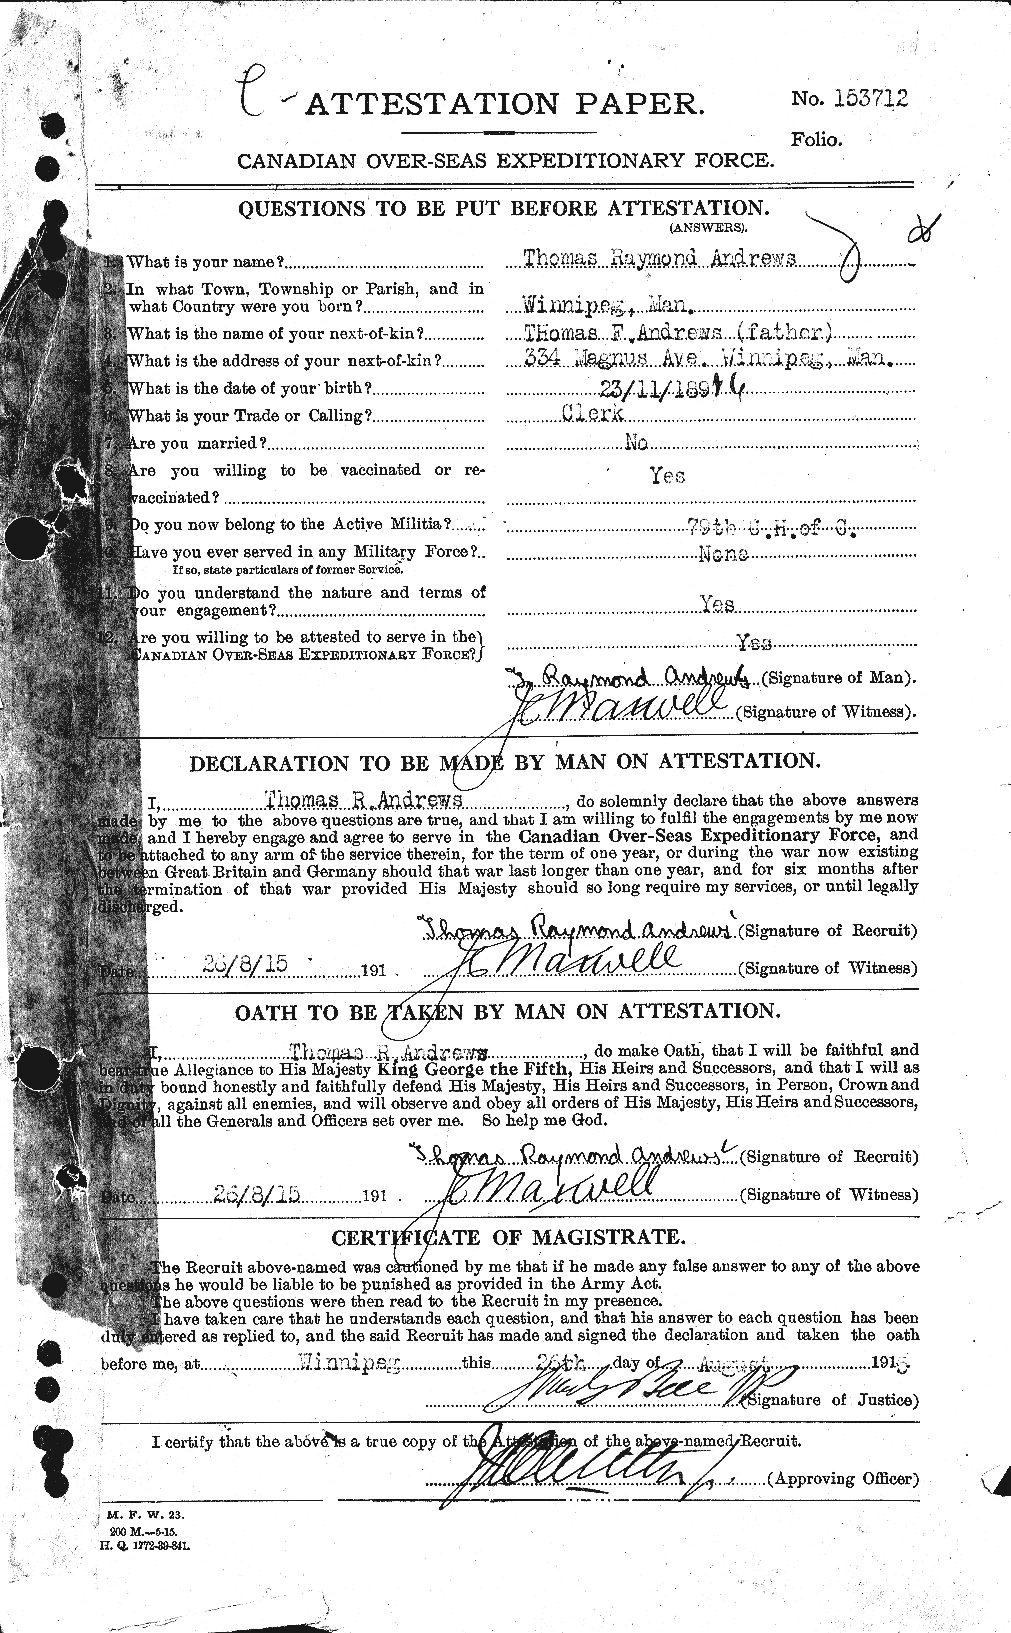 Personnel Records of the First World War - CEF 212066a